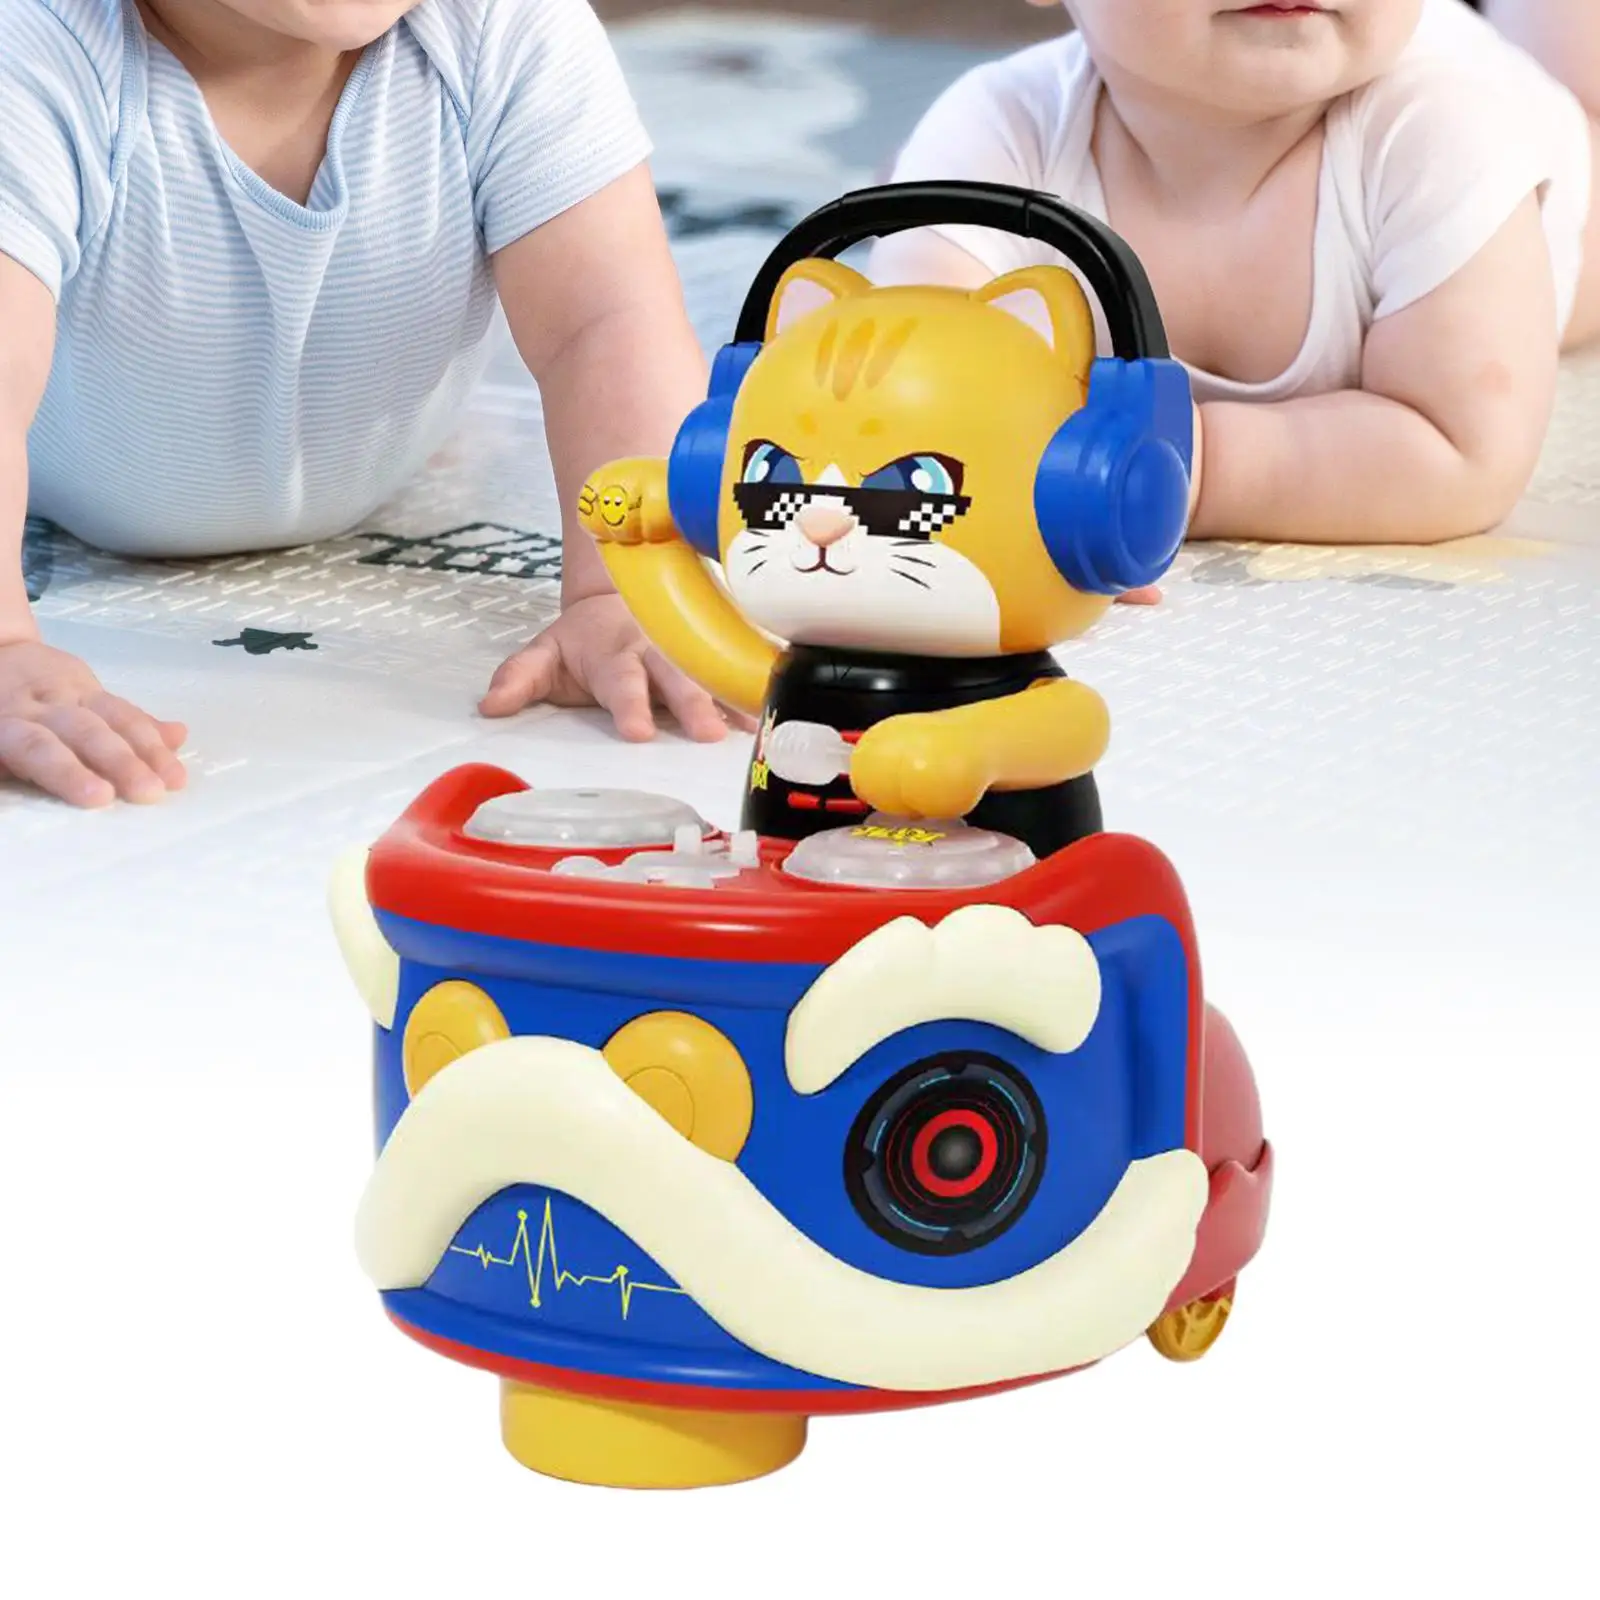 Dancing Cat Universal Wheel Robot Interaction Toy Baby Toy for Kindergarten Entertainment Child Party Supplies Birthday Gift